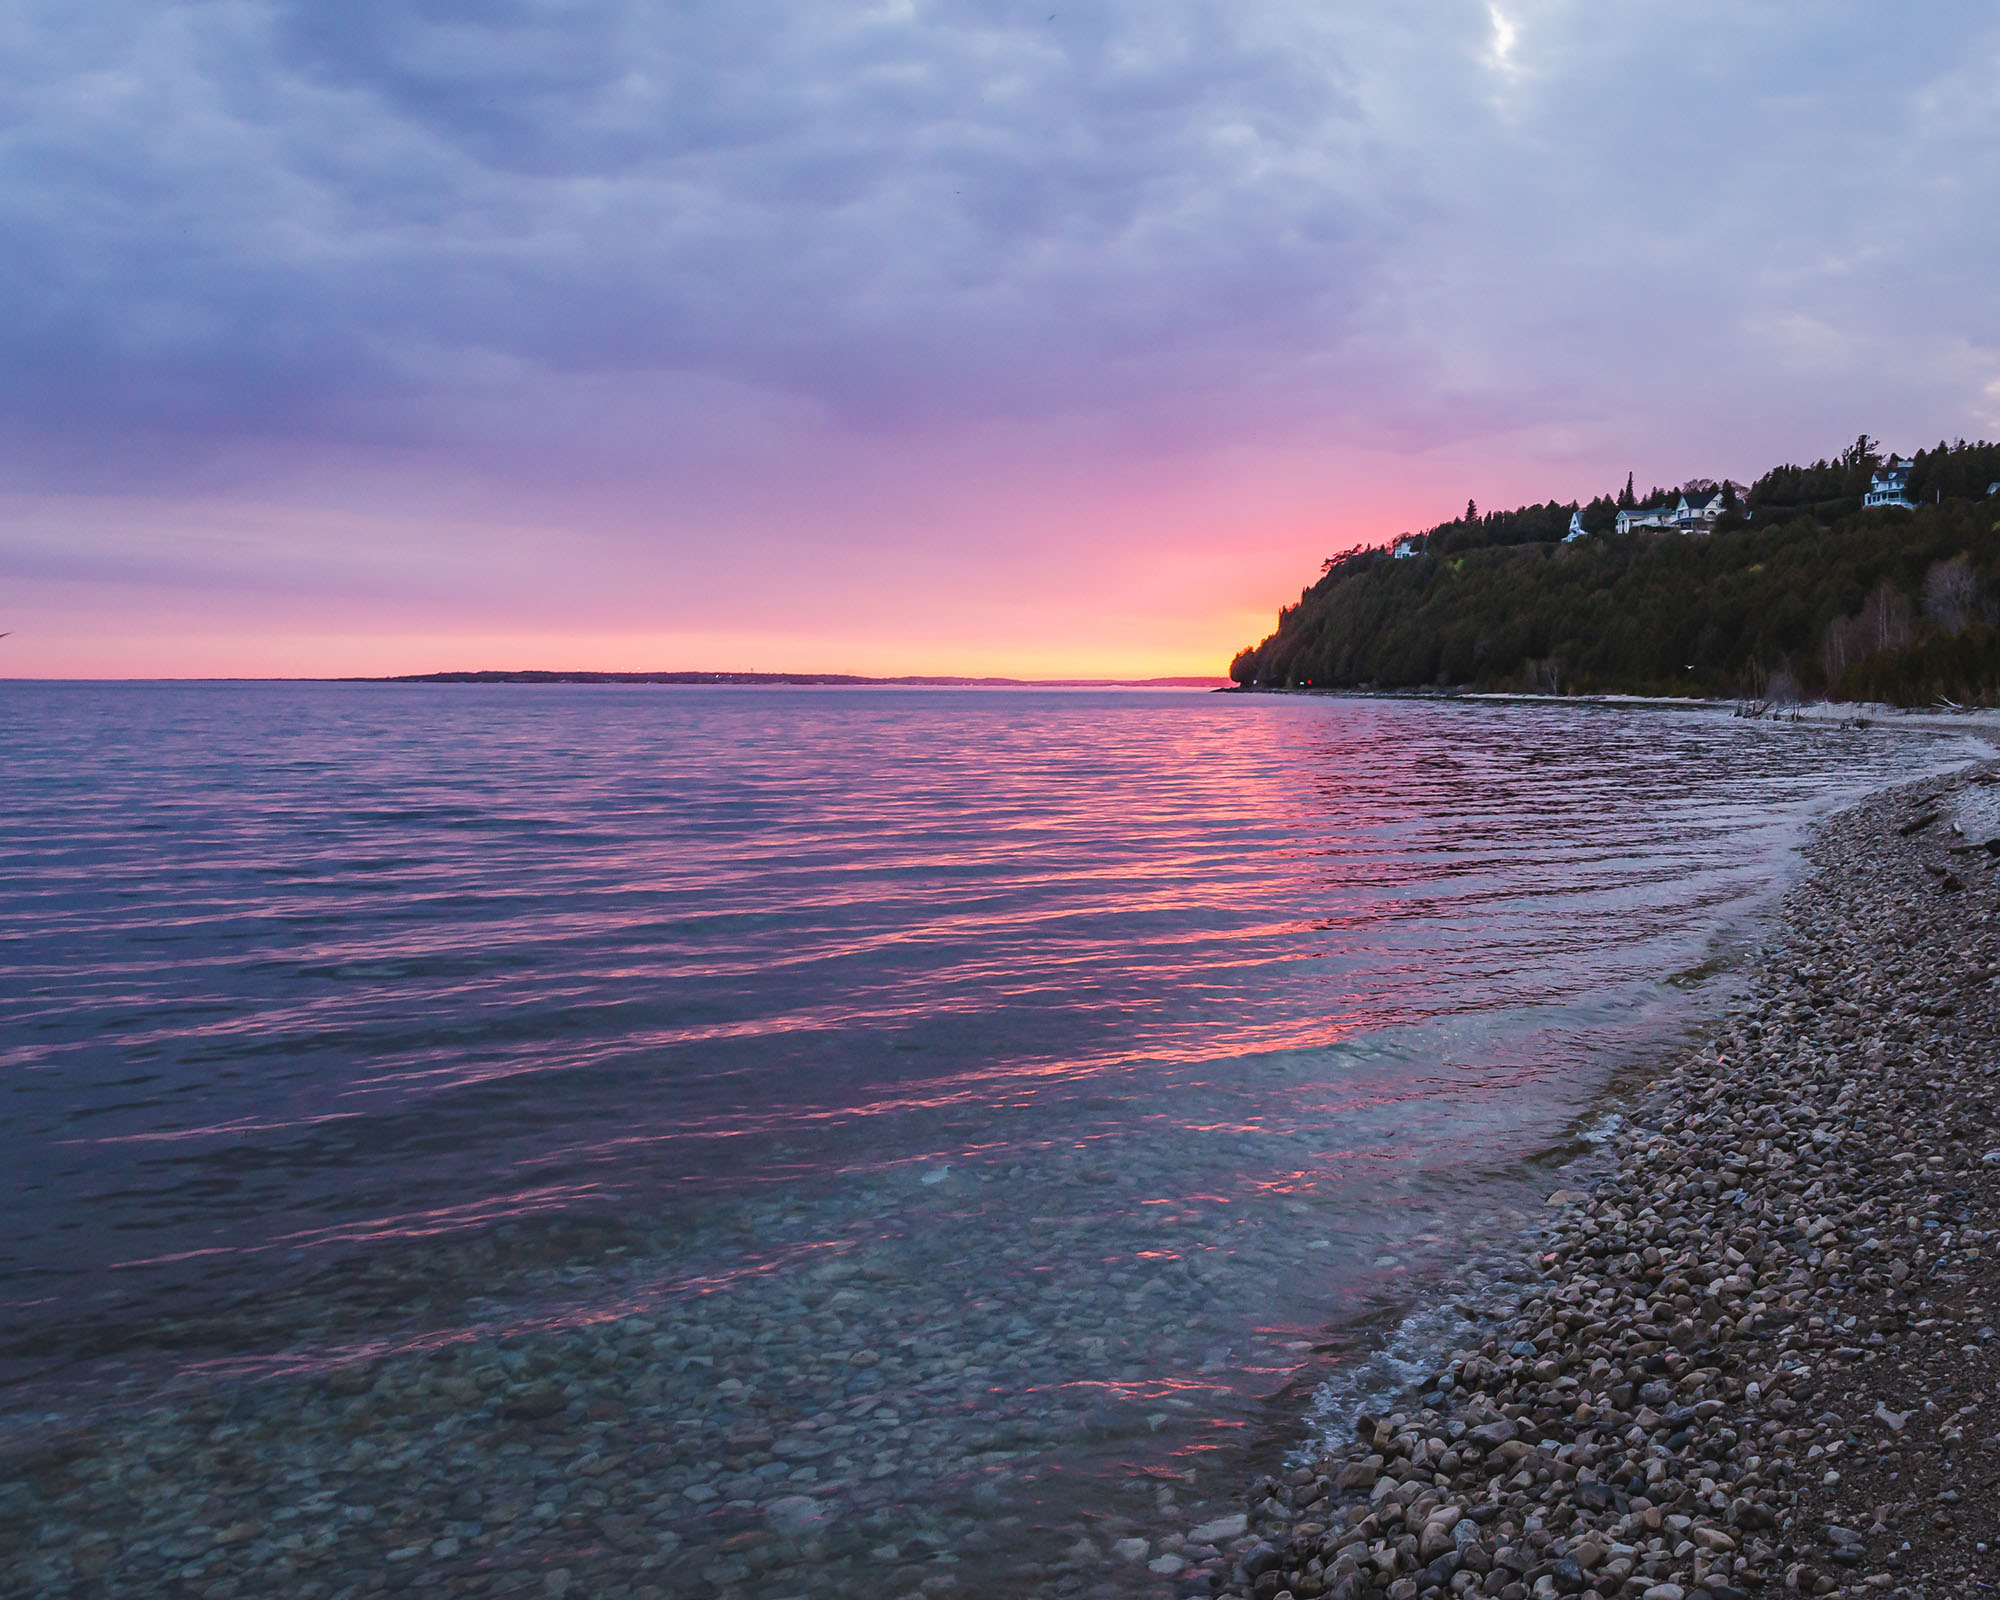 Contact Mackinac Island Jobs and you could see a pink sunset like this one.